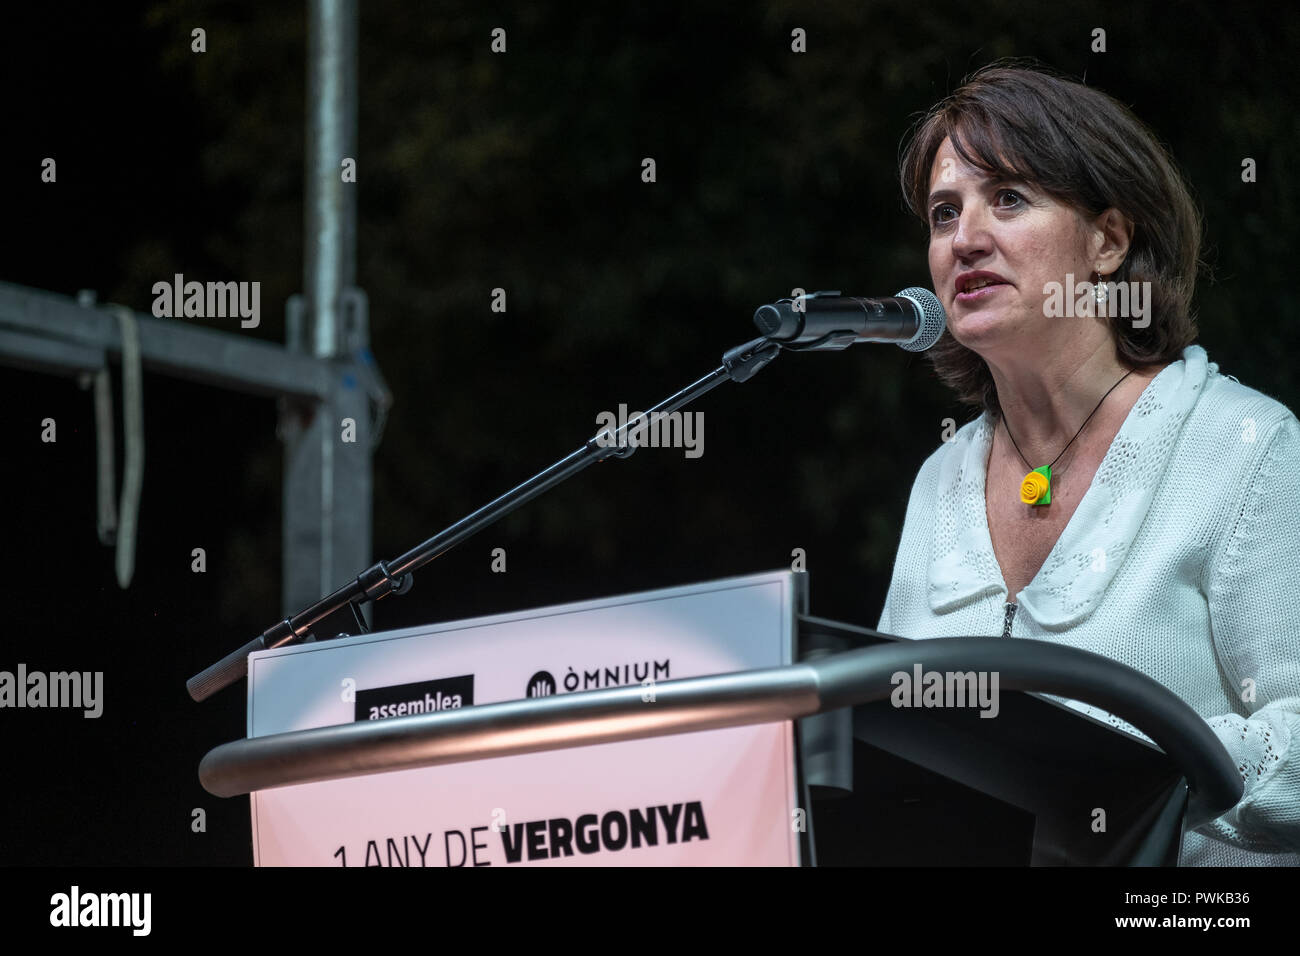 Elisenda Paluzie, President of ANC seen speaking during the protest. Thousands of people protest demanding for the freedom of Jordi Cuixart and Jordi Sànchez, "los Jordis" after 1 year in prison, under the motto a year of shame, a year of dignity, they will not stop us. Stock Photo